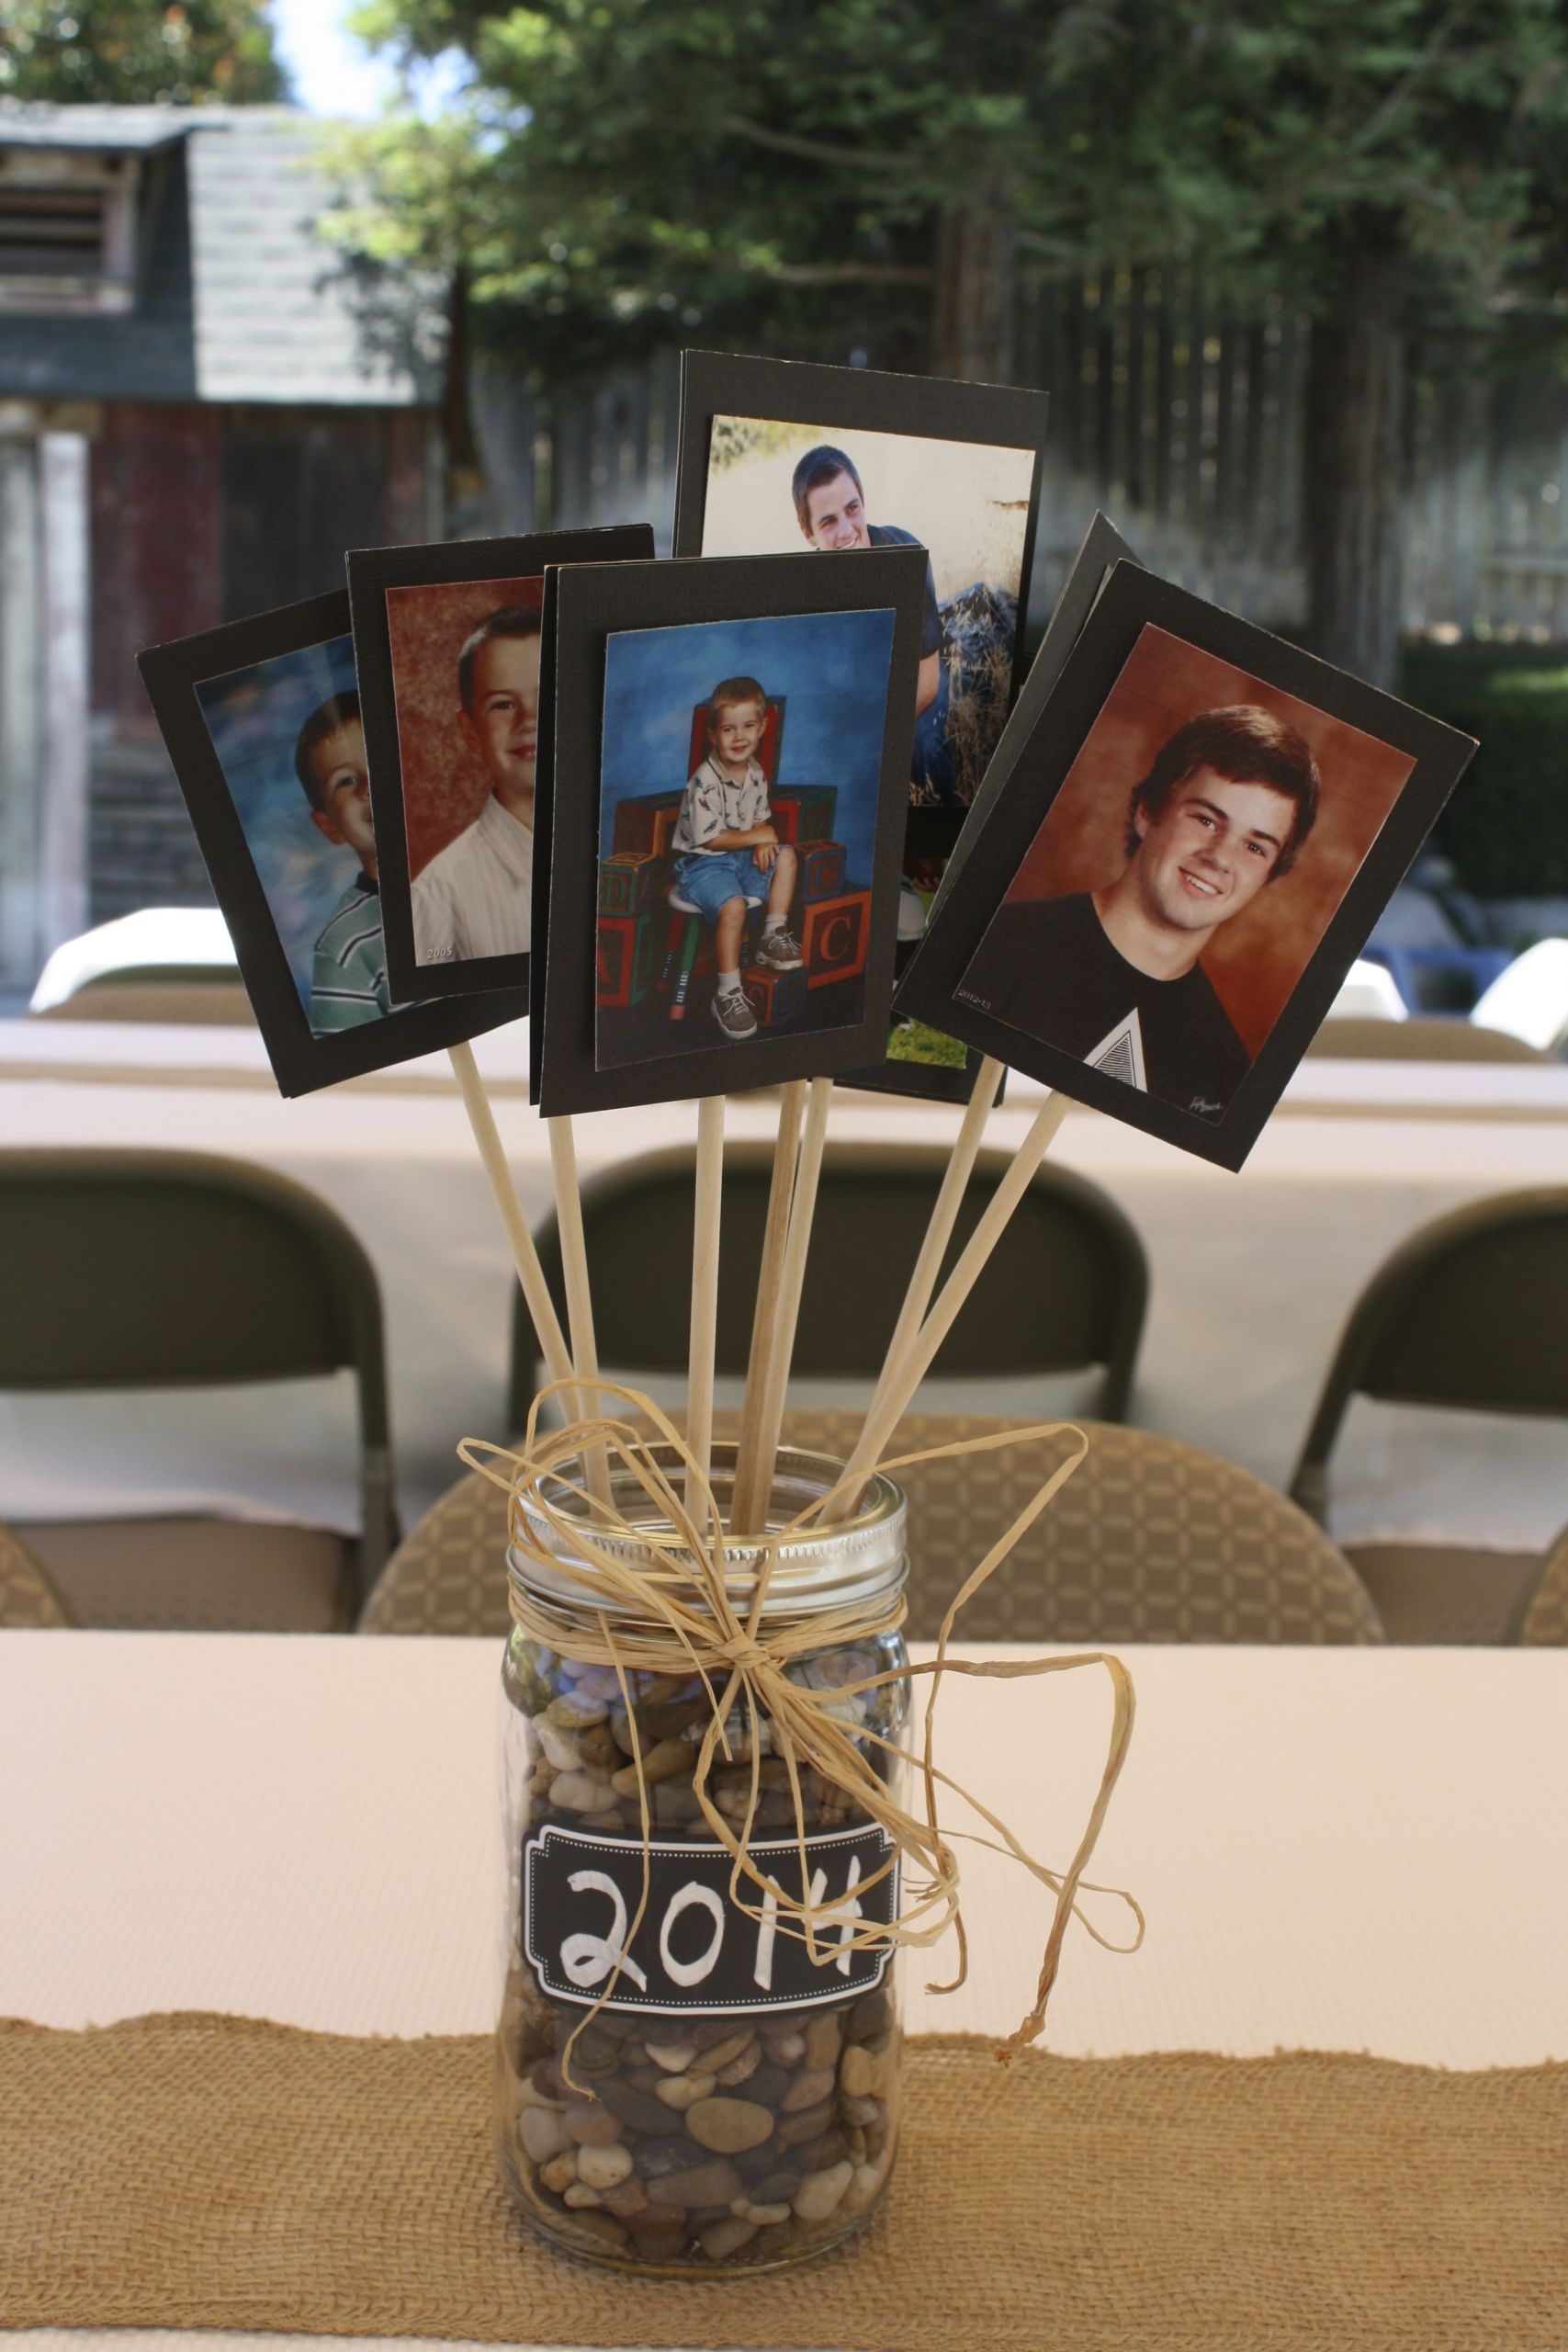 Mba Graduation Party Ideas
 Centerpiece for tables at a graduation party Good for